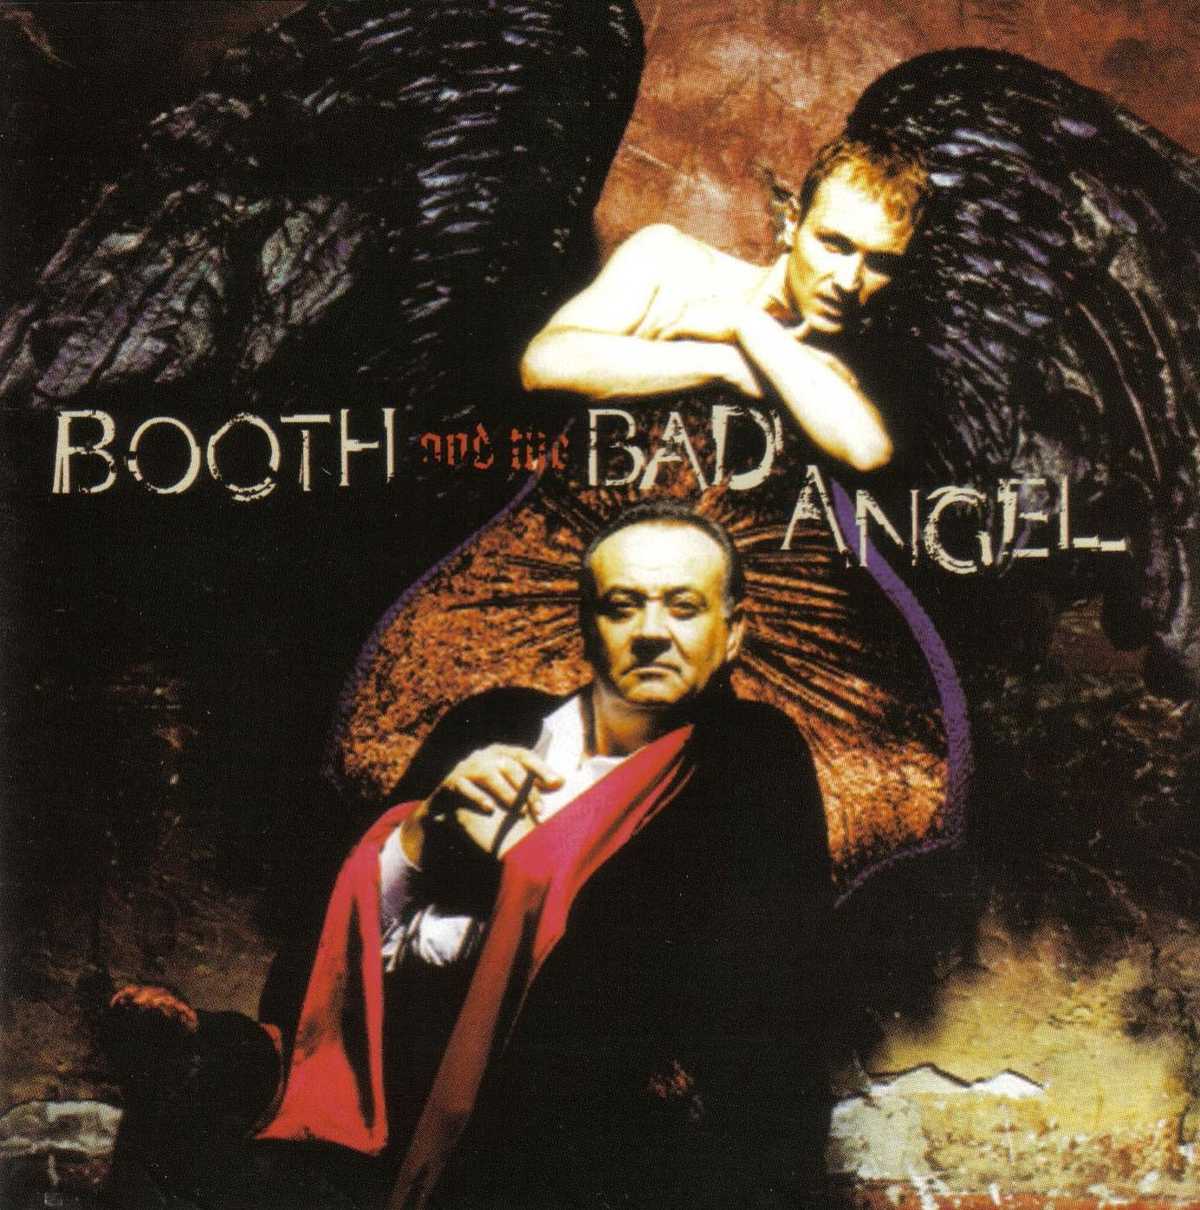 Tim Booth - The Dance of Bad Angels